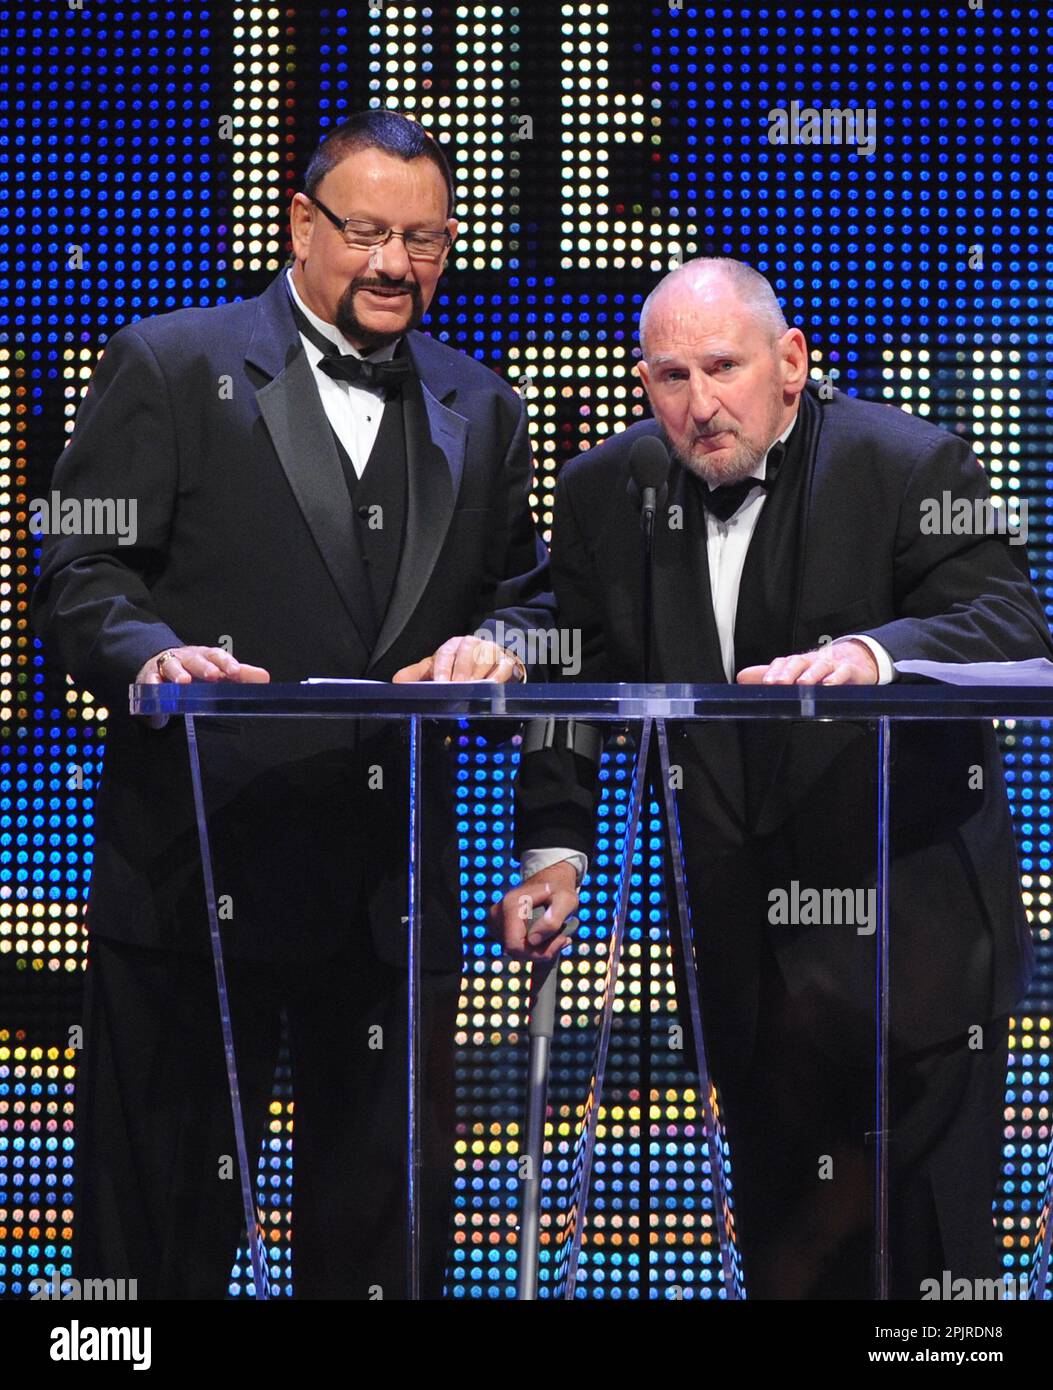 **FILE PHOTO** Bushwhacker Butch Has Passed Away At 78. New York, NY- March 28: The Bushwhackers: Luke Williams and Butch Miller are inducted into the 2015 WWE Hall Of Fame on March 28, 2015 at the SAP Center in San Jose, California. Credit: George Napolitano/MediaPunch Stock Photo